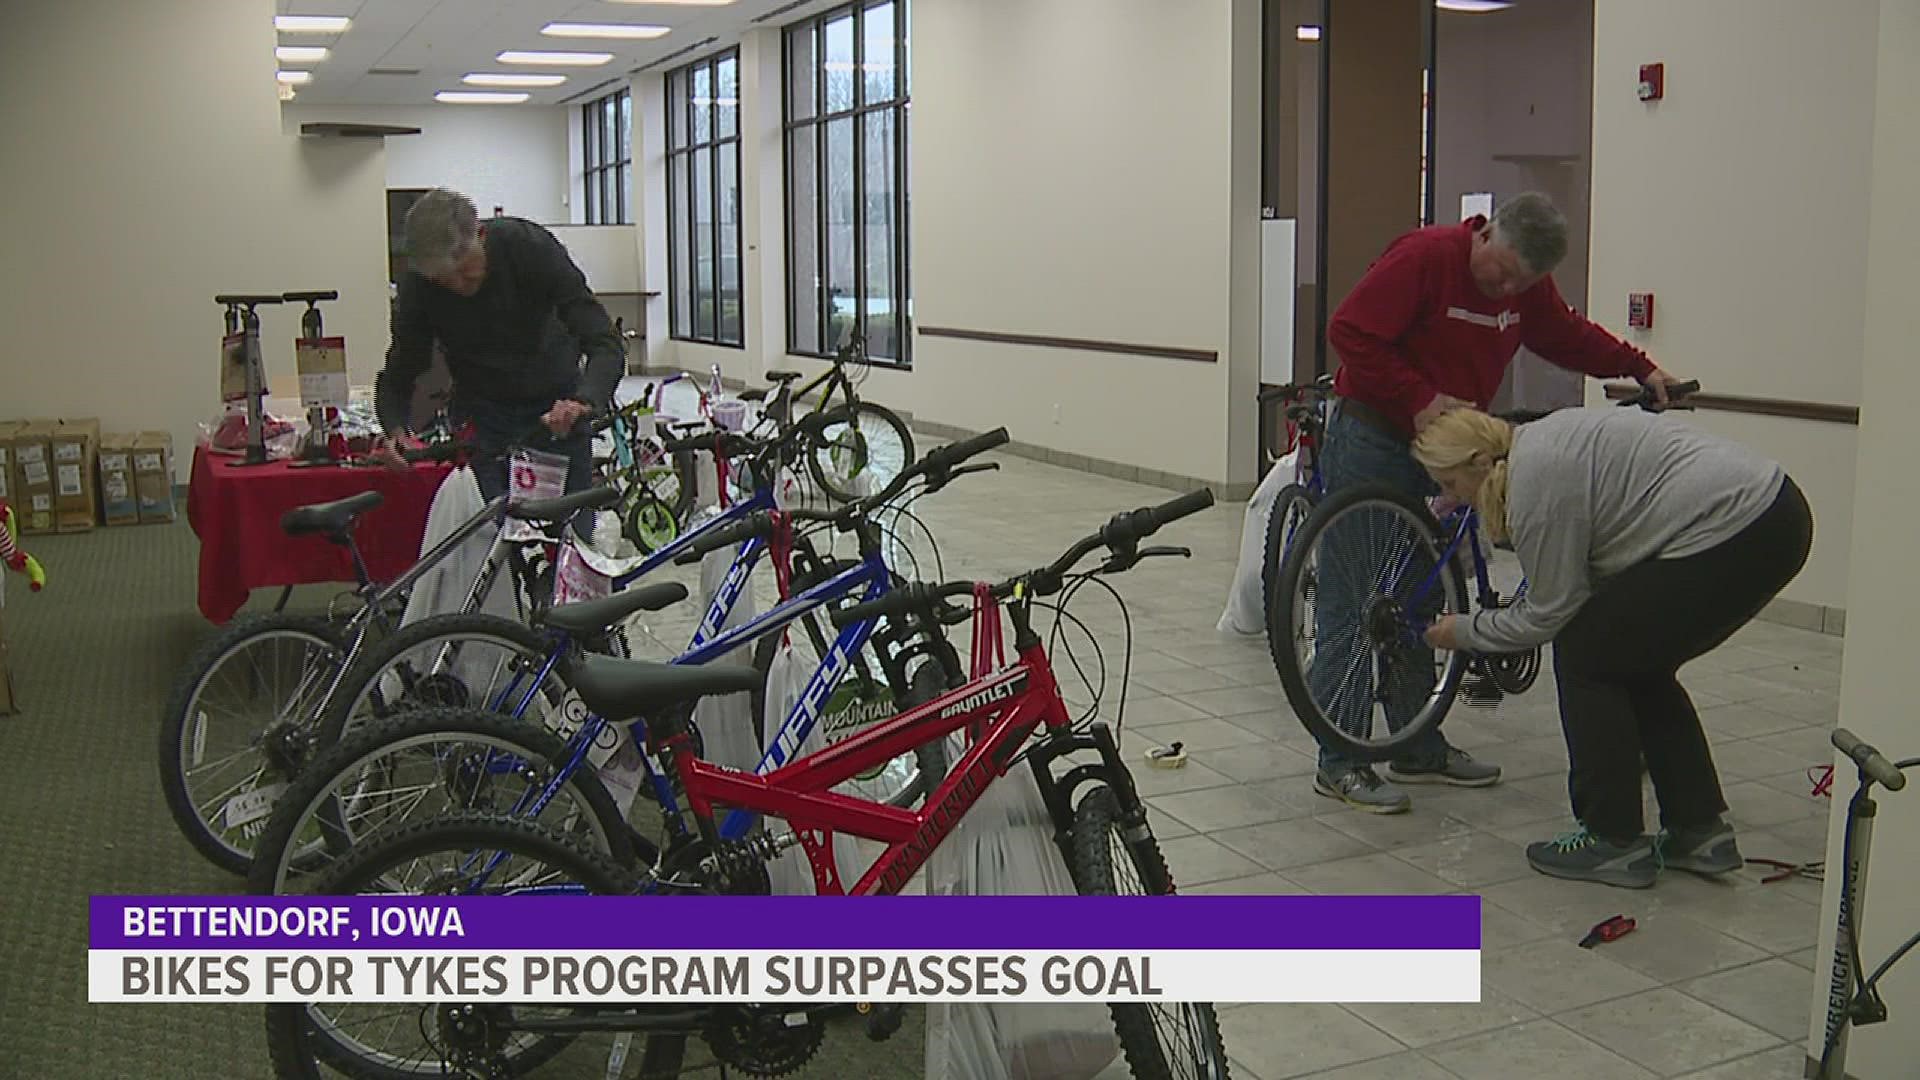 In 2021 the group was able to donate 130 bikes. This year the group set a goal of 150 bikes. So far they have 200 bikes that will benefit Quad Cities youth.